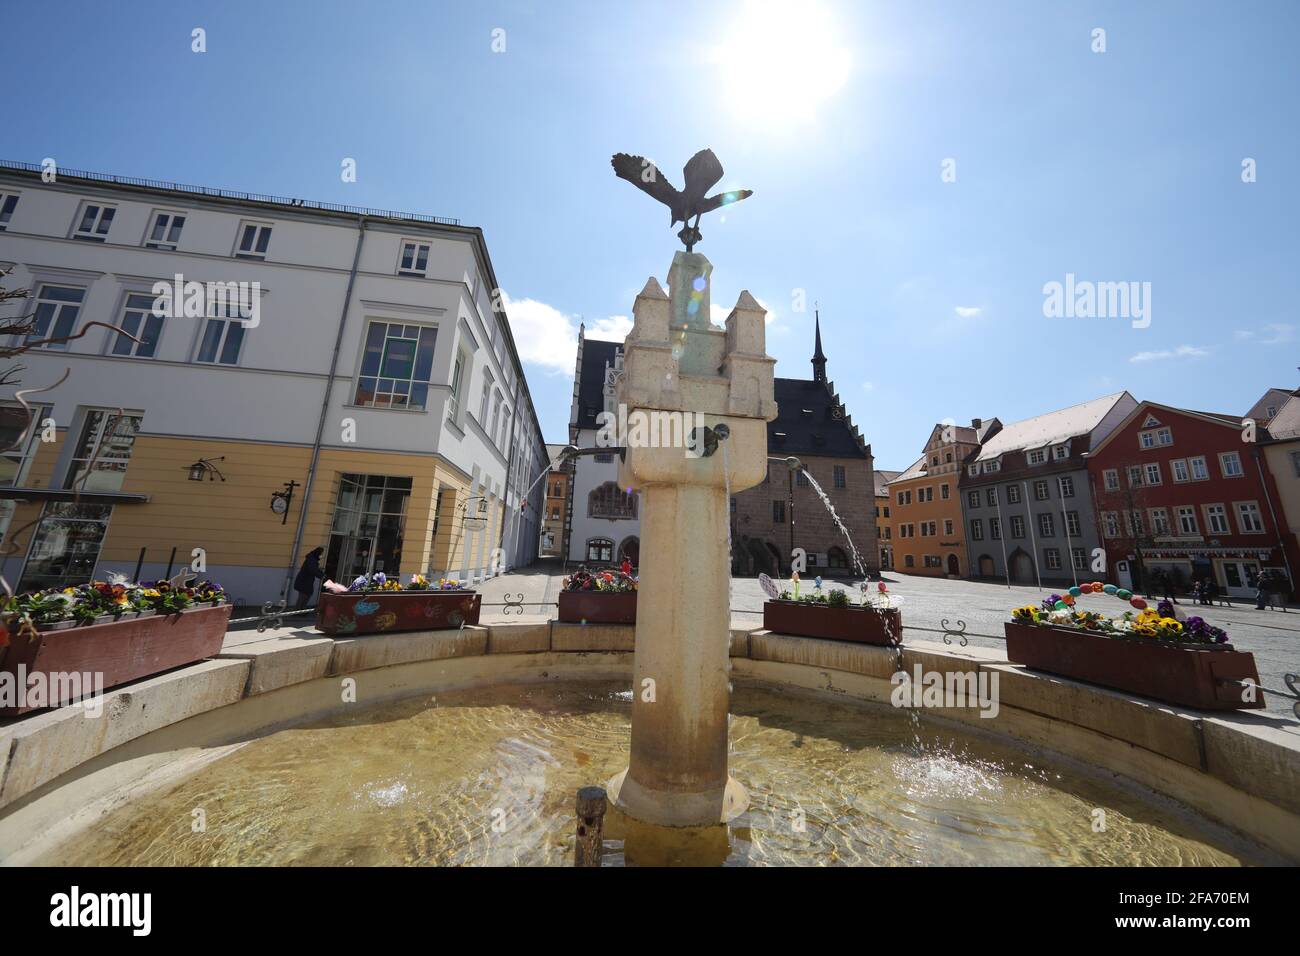 23 April 2021, Thuringia, Neustadt an der Orla: The fountain in the town's market square is decorated with colourful flowers. The district Saale-Orla-Kreis (TH) has the highest 7-day incidence in Germany with 377.3. (as of 23.04.2021) Photo: Bodo Schackow/dpa-Zentralbild/dpa Stock Photo